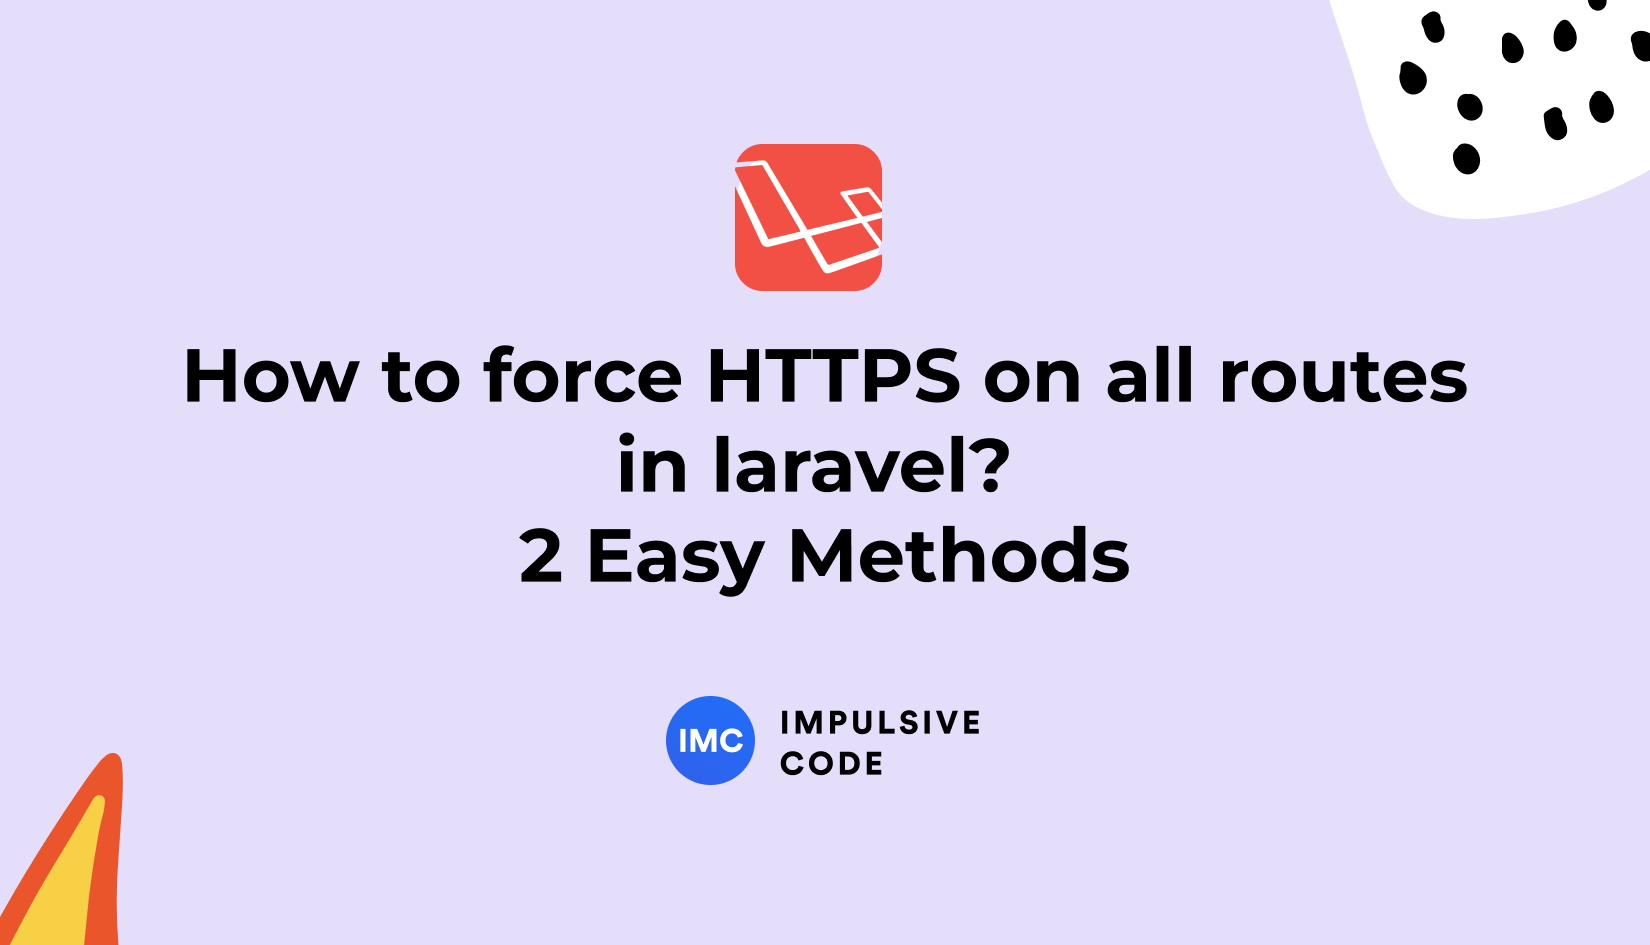 How to force HTTPS on all routes in laravel? 2 Easy Methods